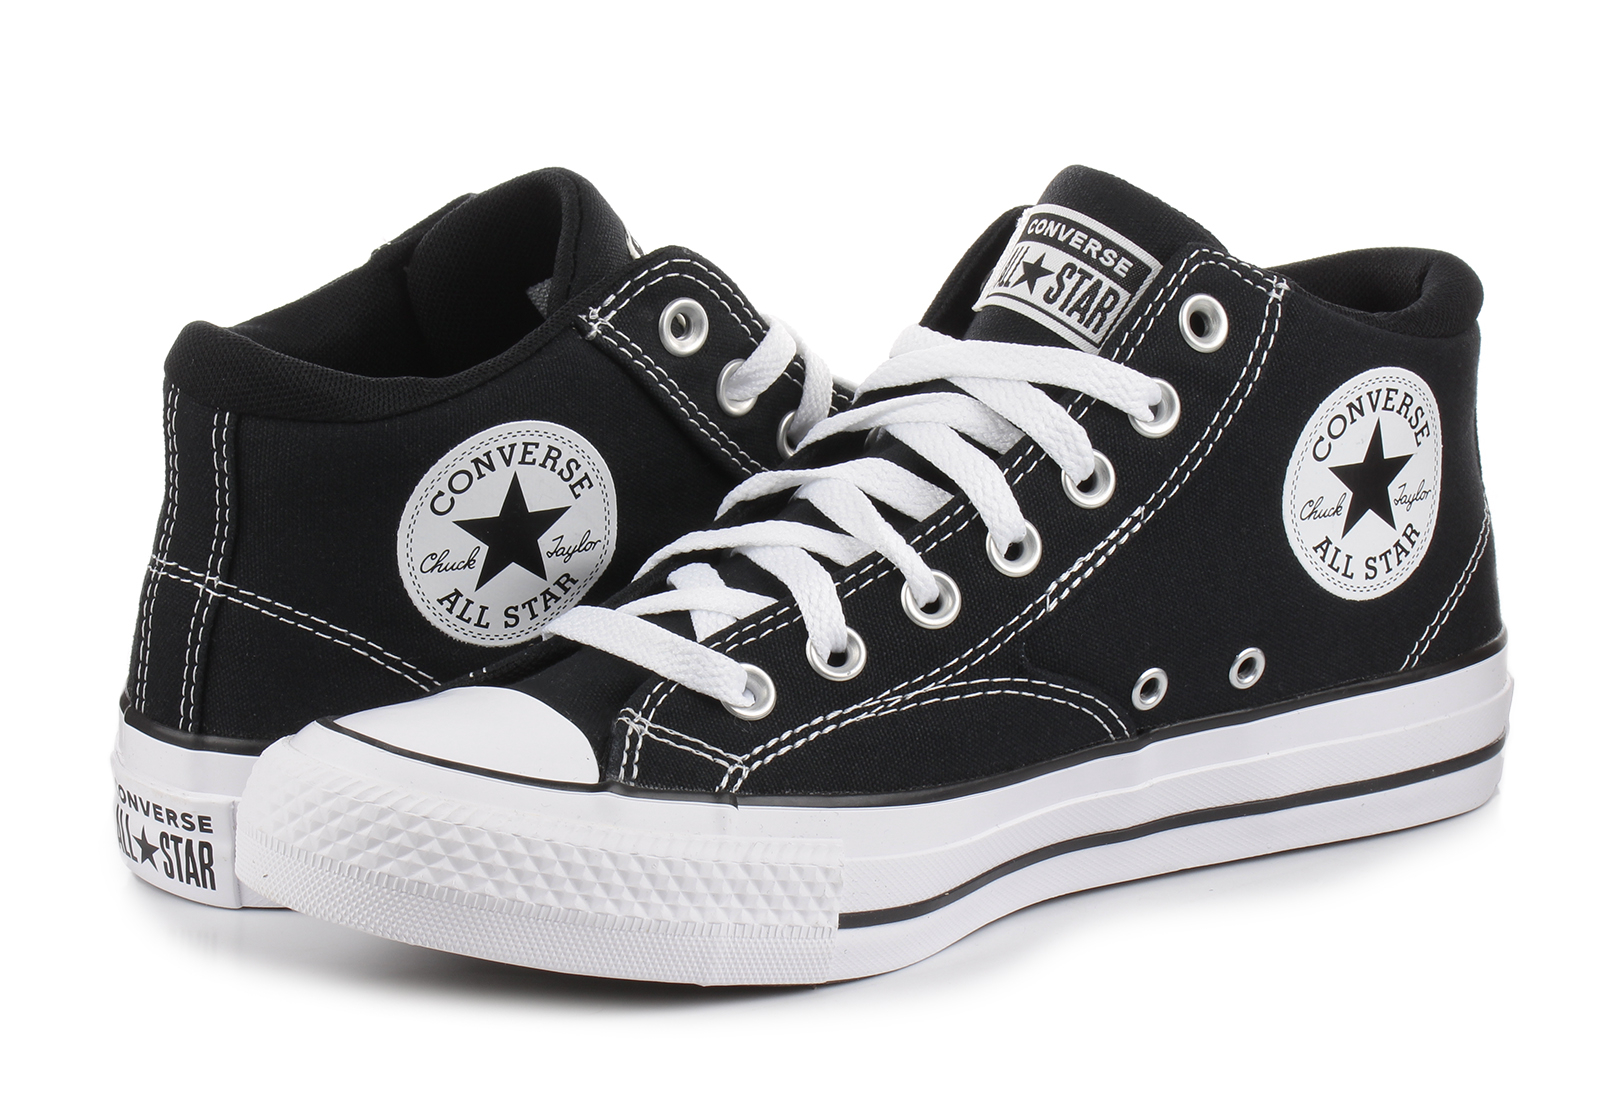 Street Taylor shoes trainers Converse Chuck - Online High A00811C - Malden All and boots sneakers, - Star for shop